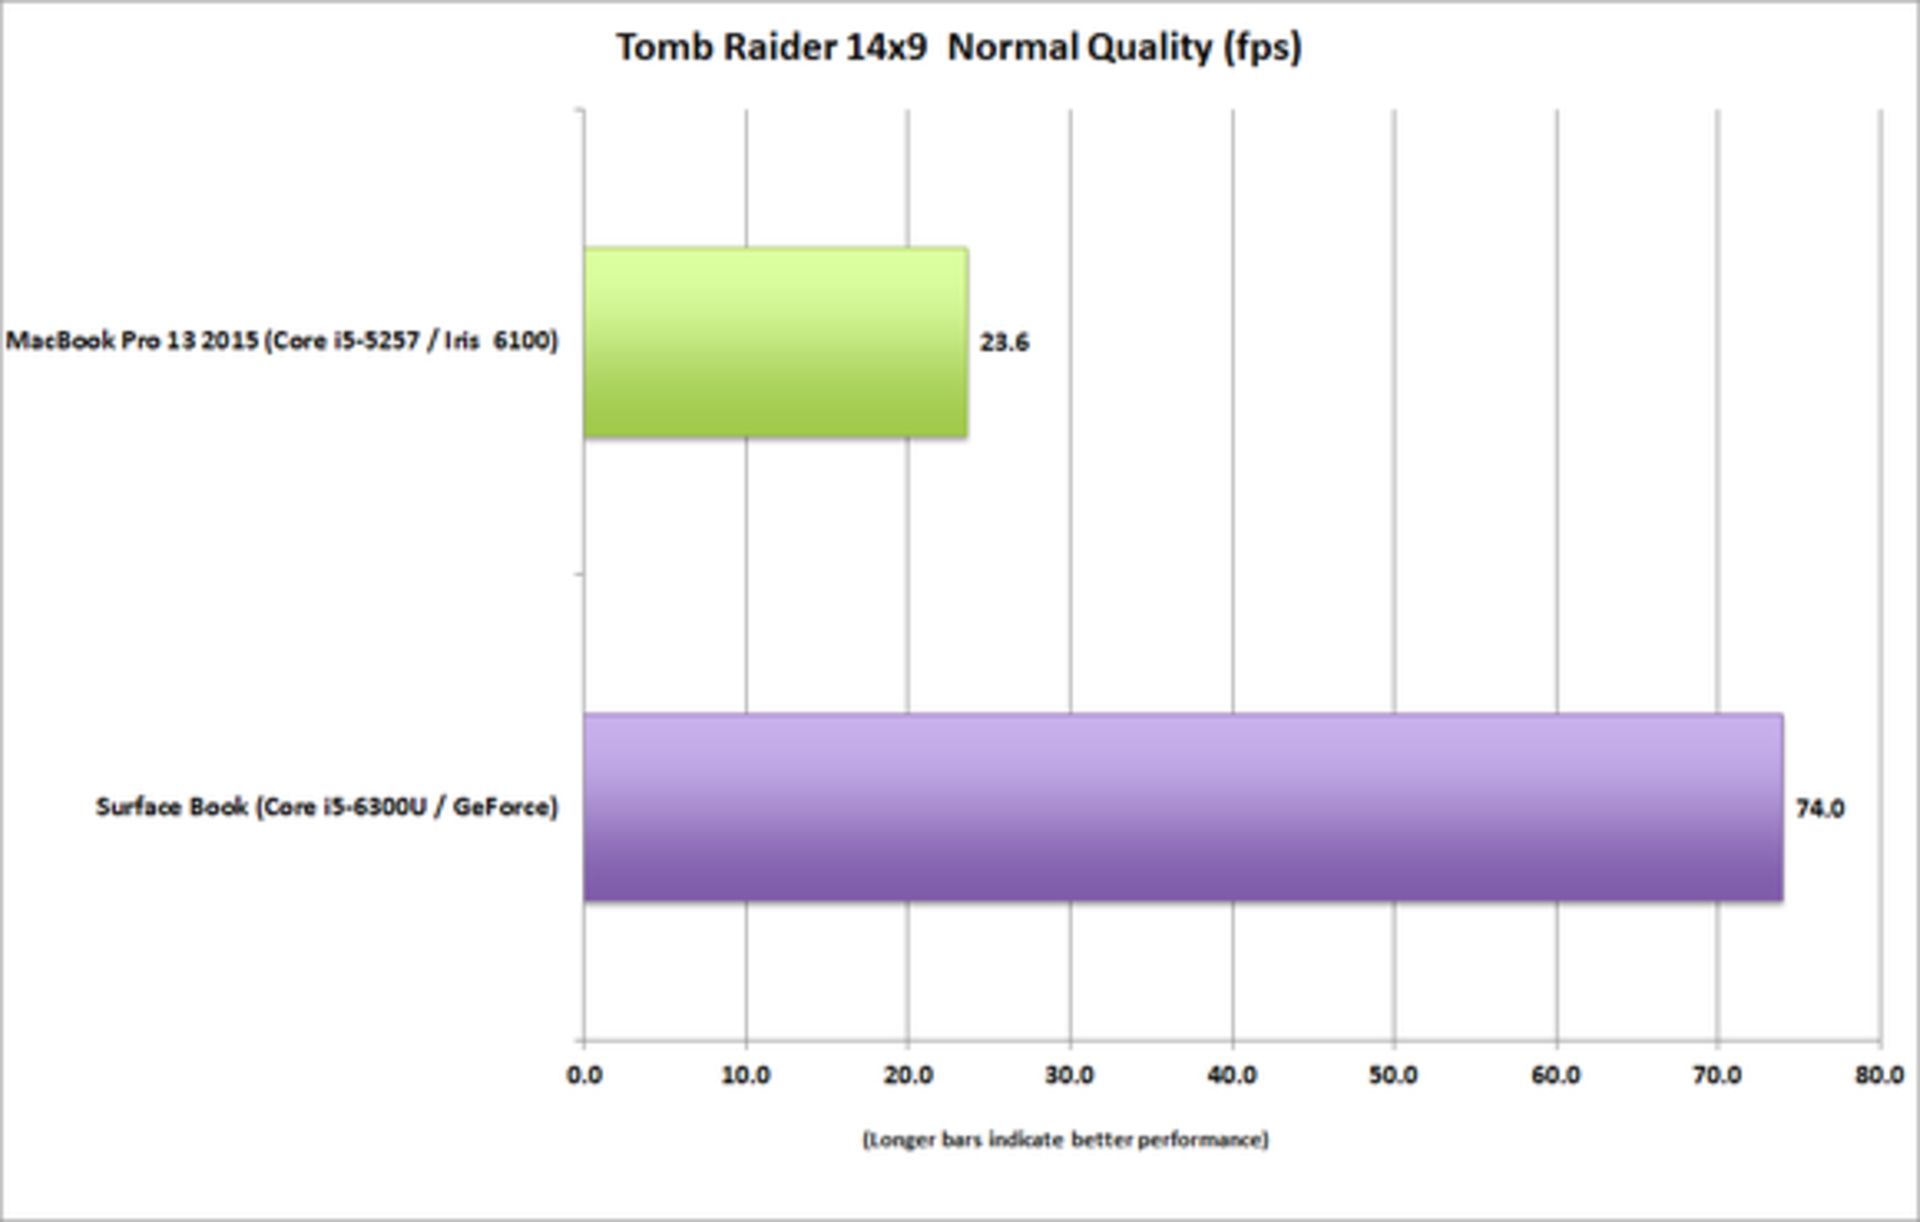 surface book vs macbook pro 13 tomb raider 14x9 normal 100623041 large